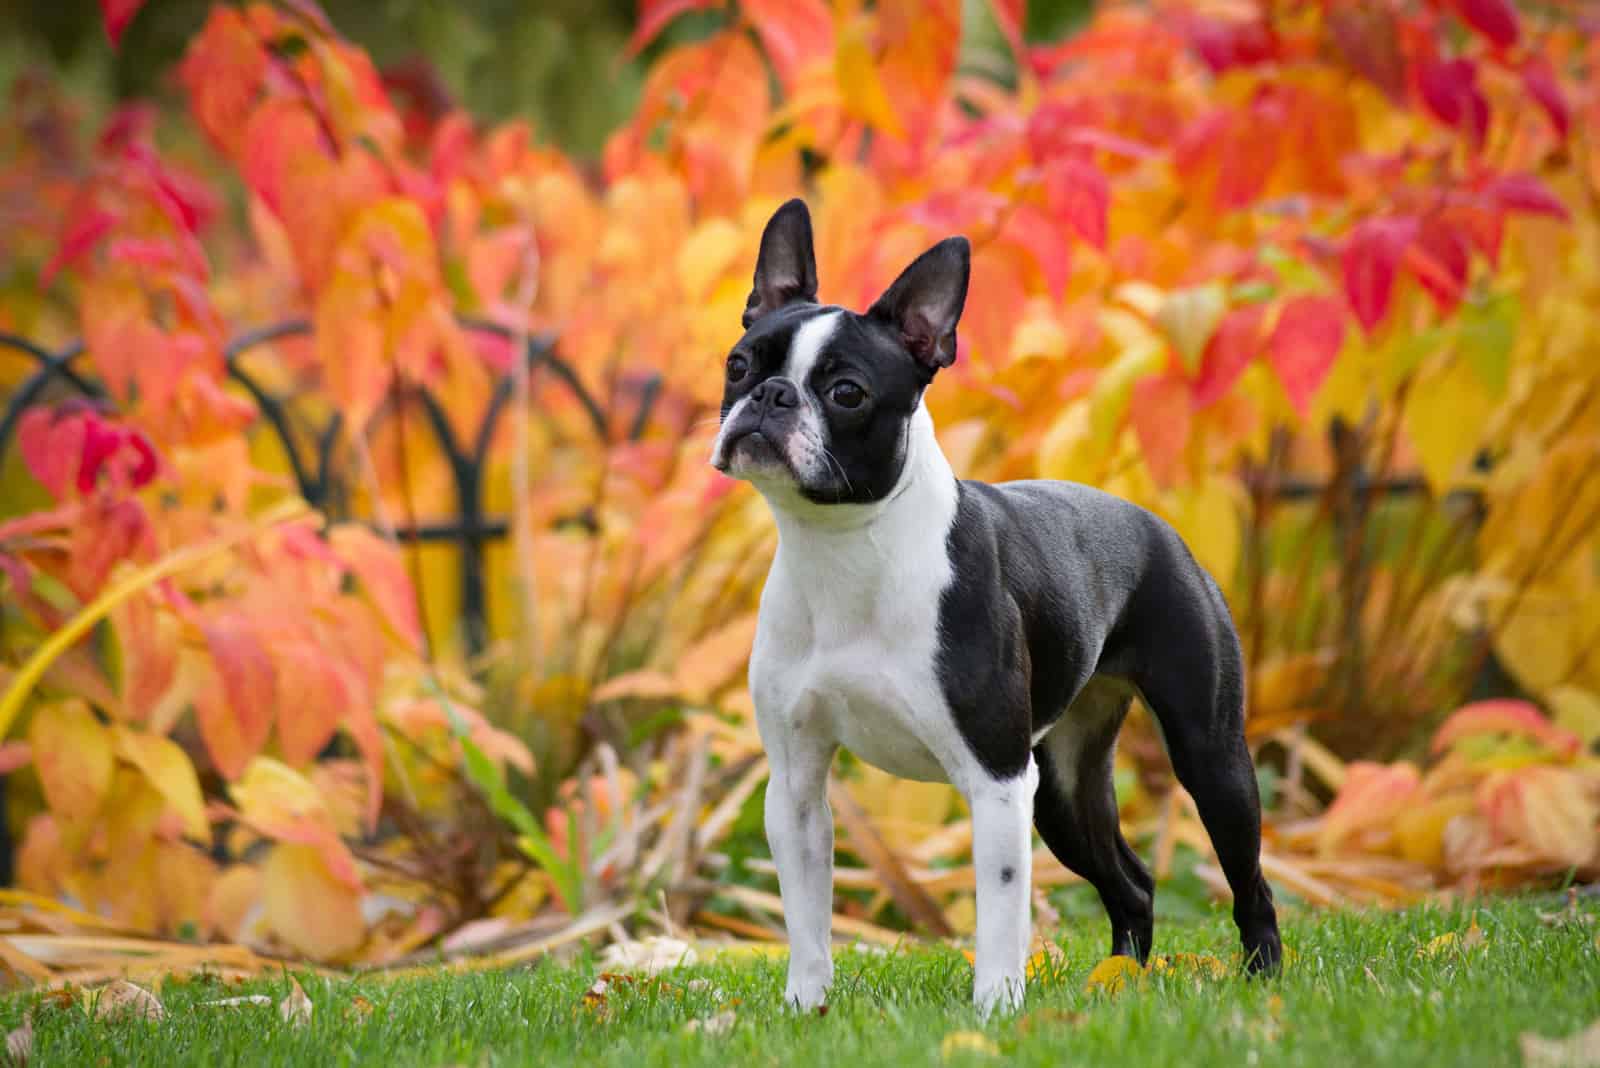 The Boston Terrier stands on green grass